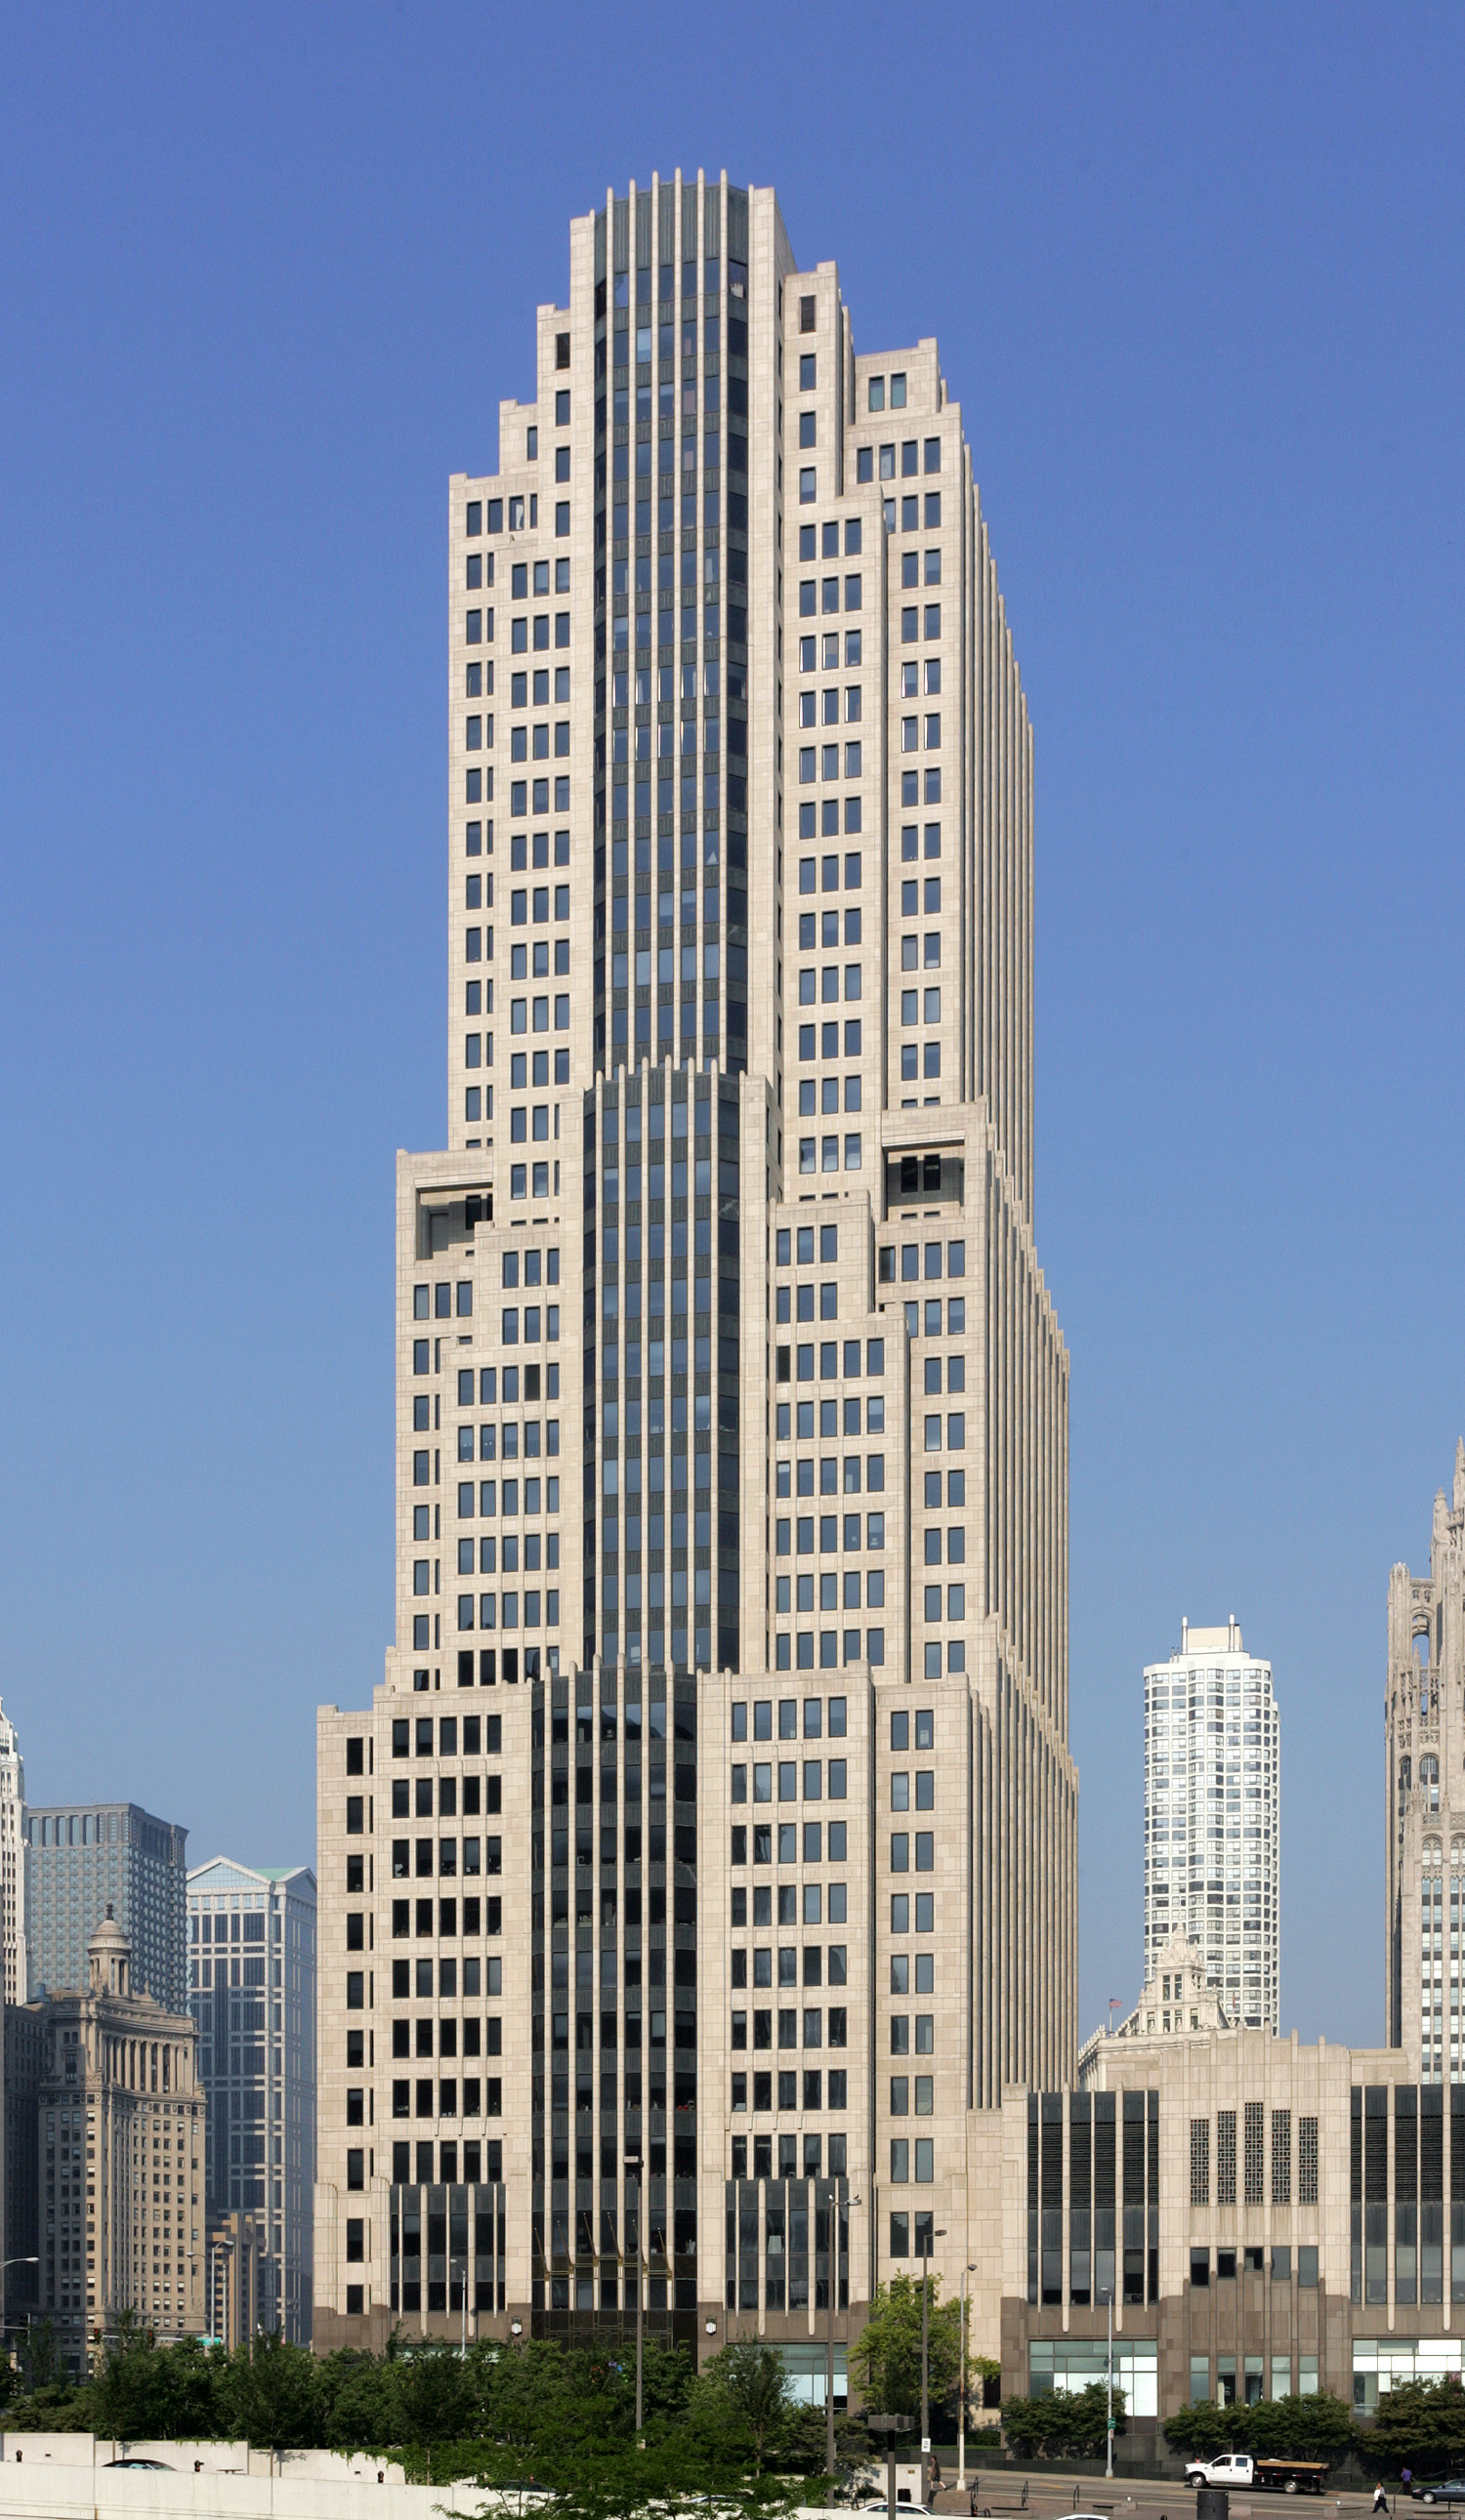 NBC Tower, Chicago - View from the east. © Mathias Beinling